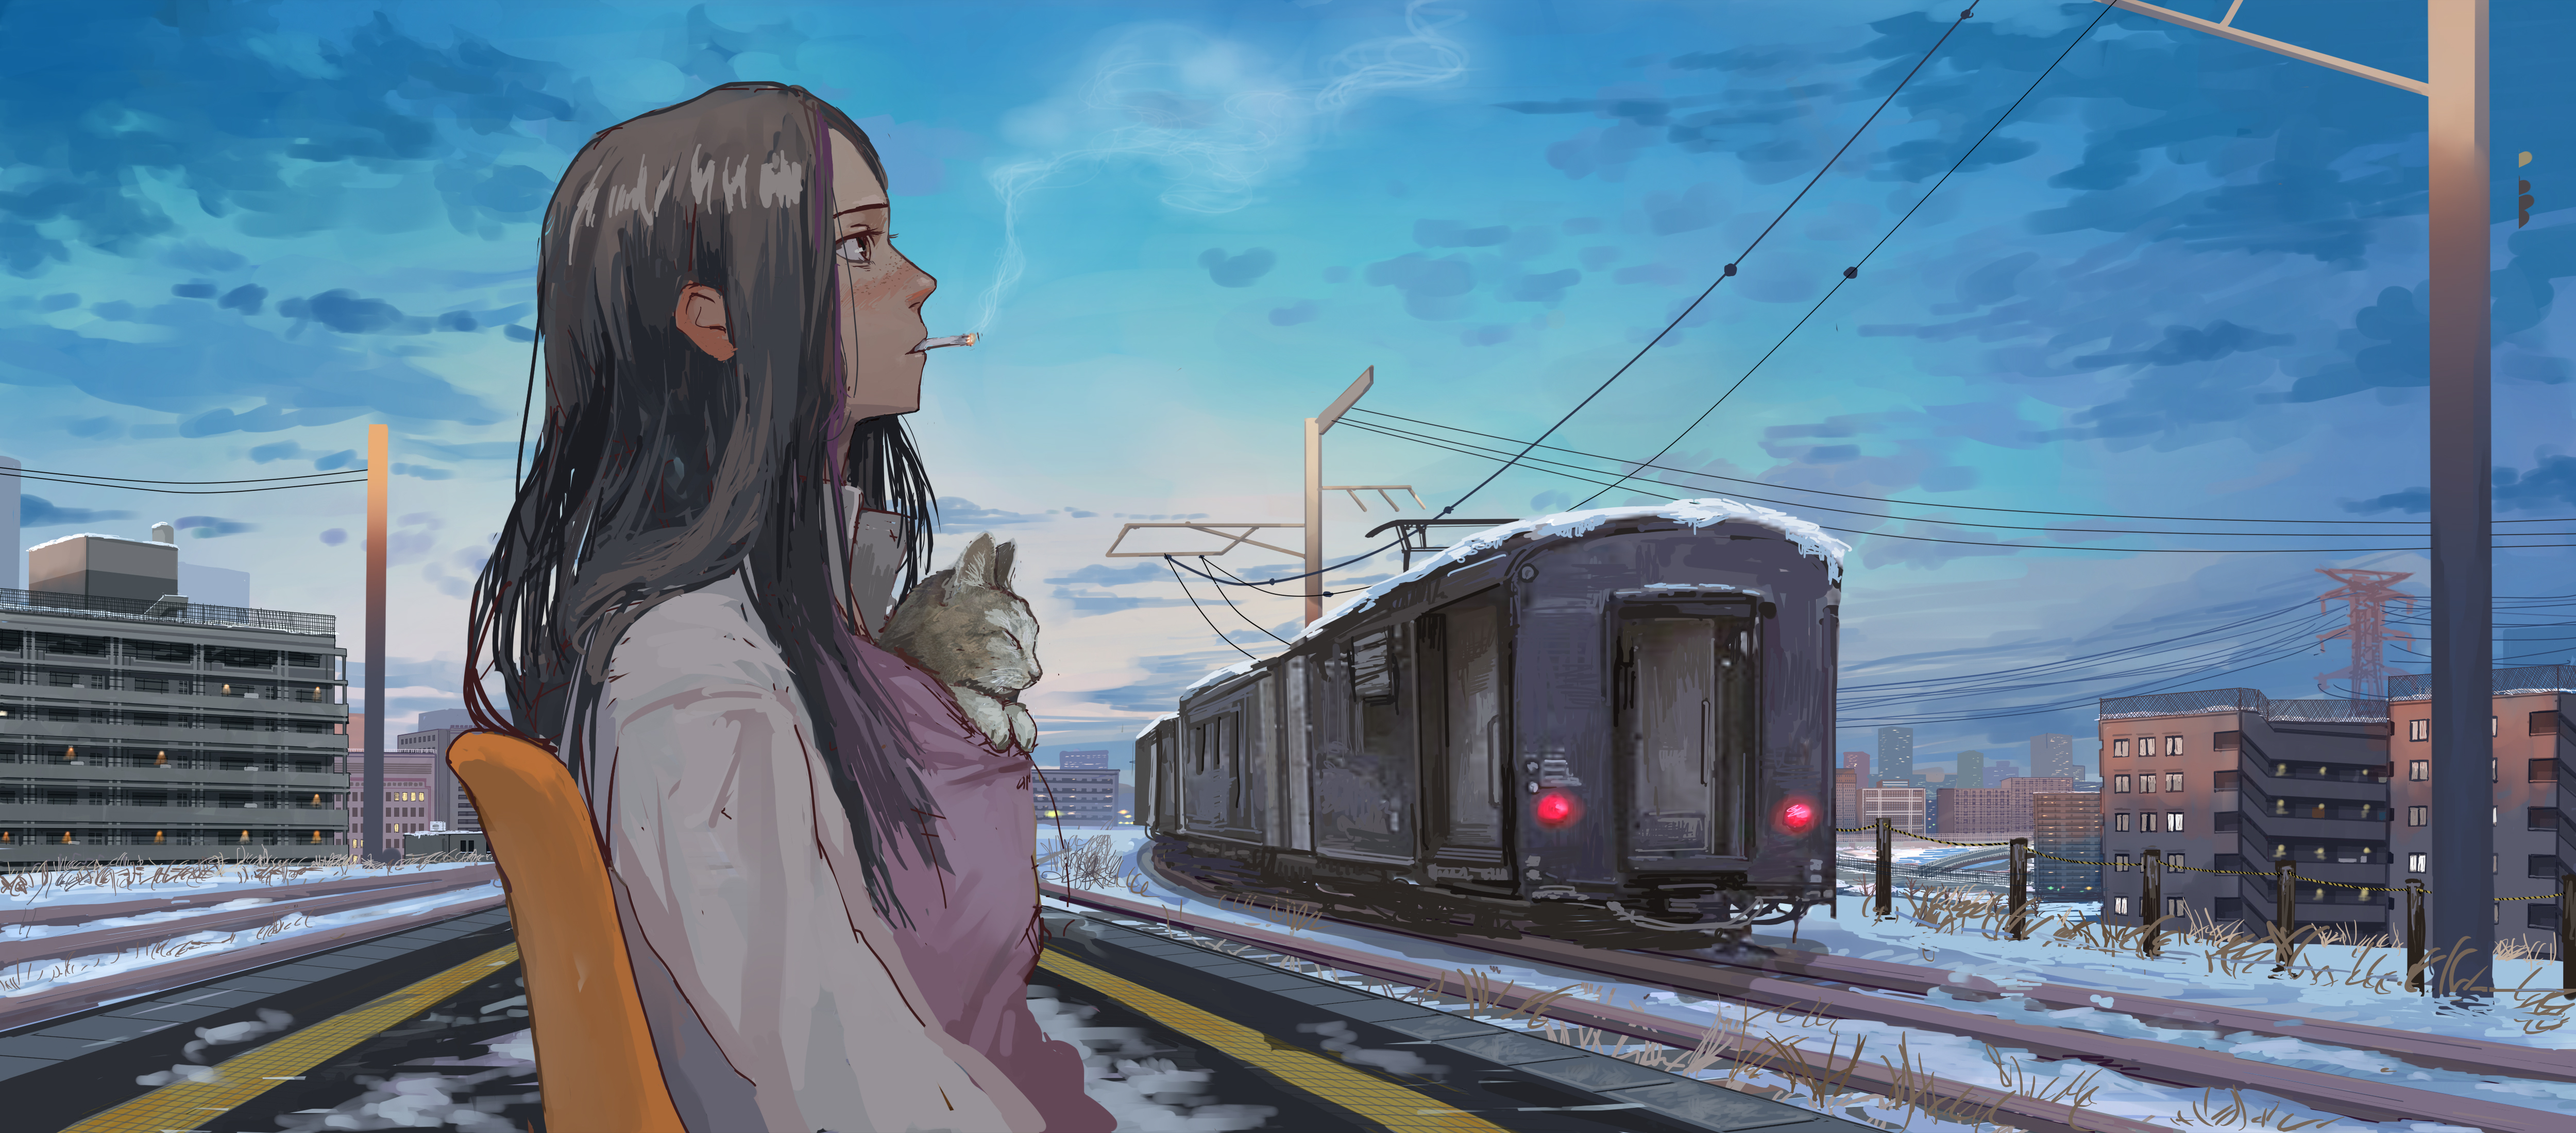 Lofi Train In Nature, Anime Manga Style Illustration Design, Wallpaper  Background Art, Generated By AI Stock Photo, Picture And Royalty Free  Image. Image 206287214.